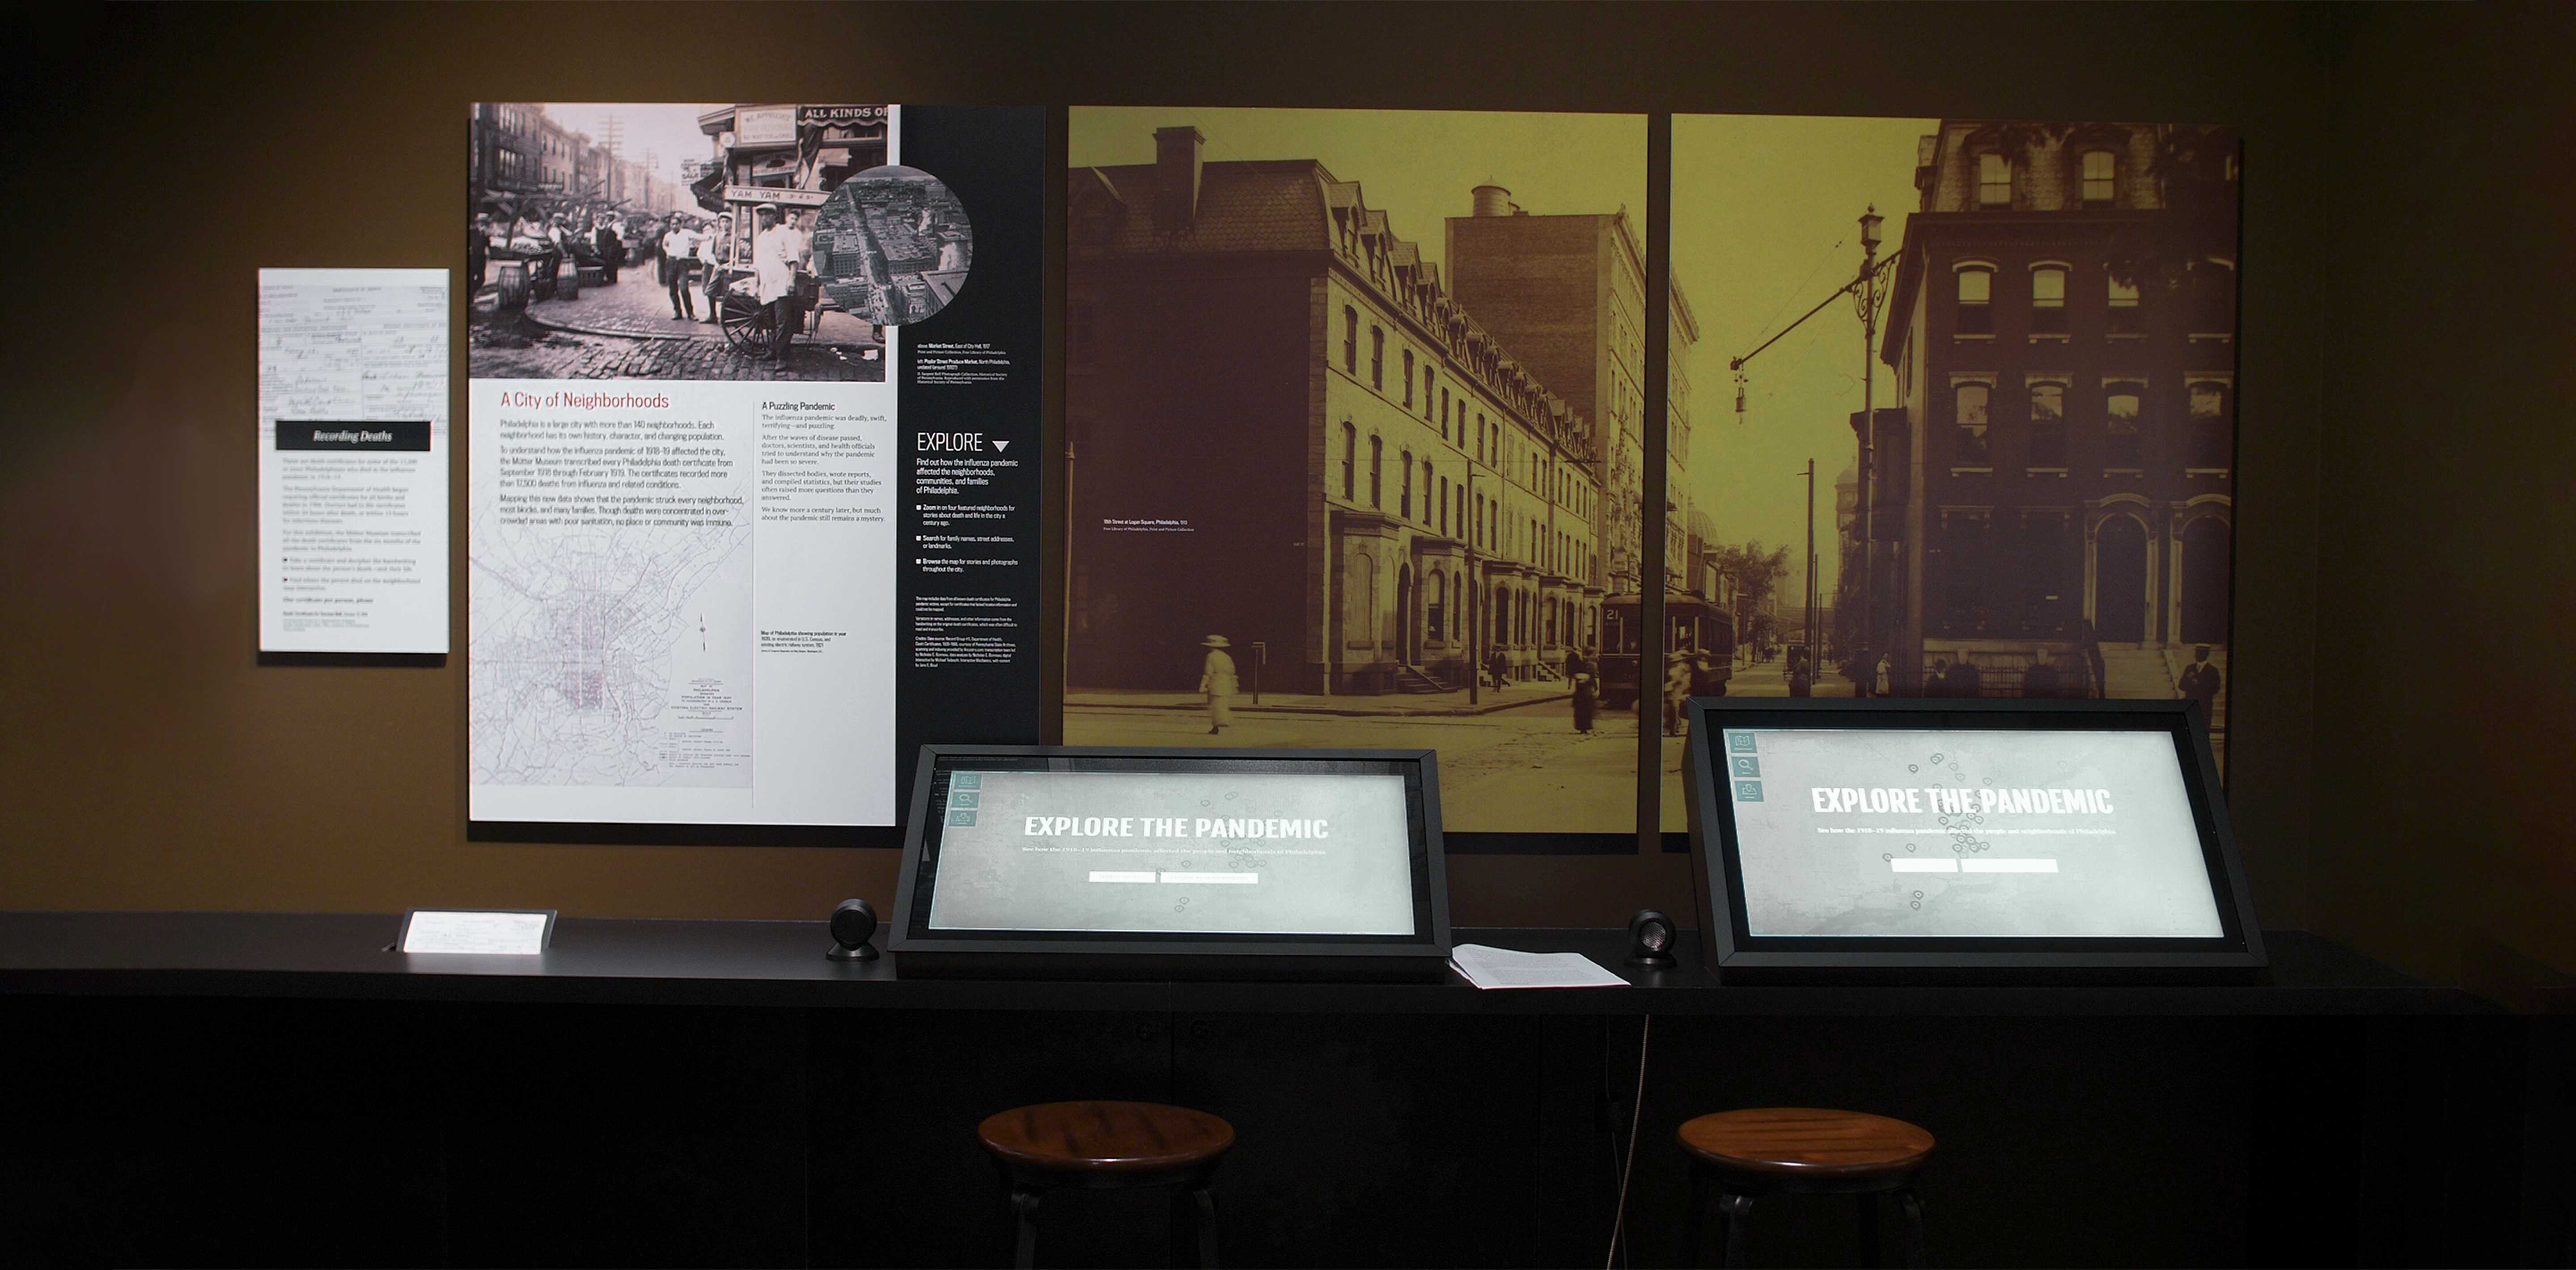 Photo of Spit Spreads Death exhibition with historical photos on the wall and interactive computers that say "Explore the pandemic"